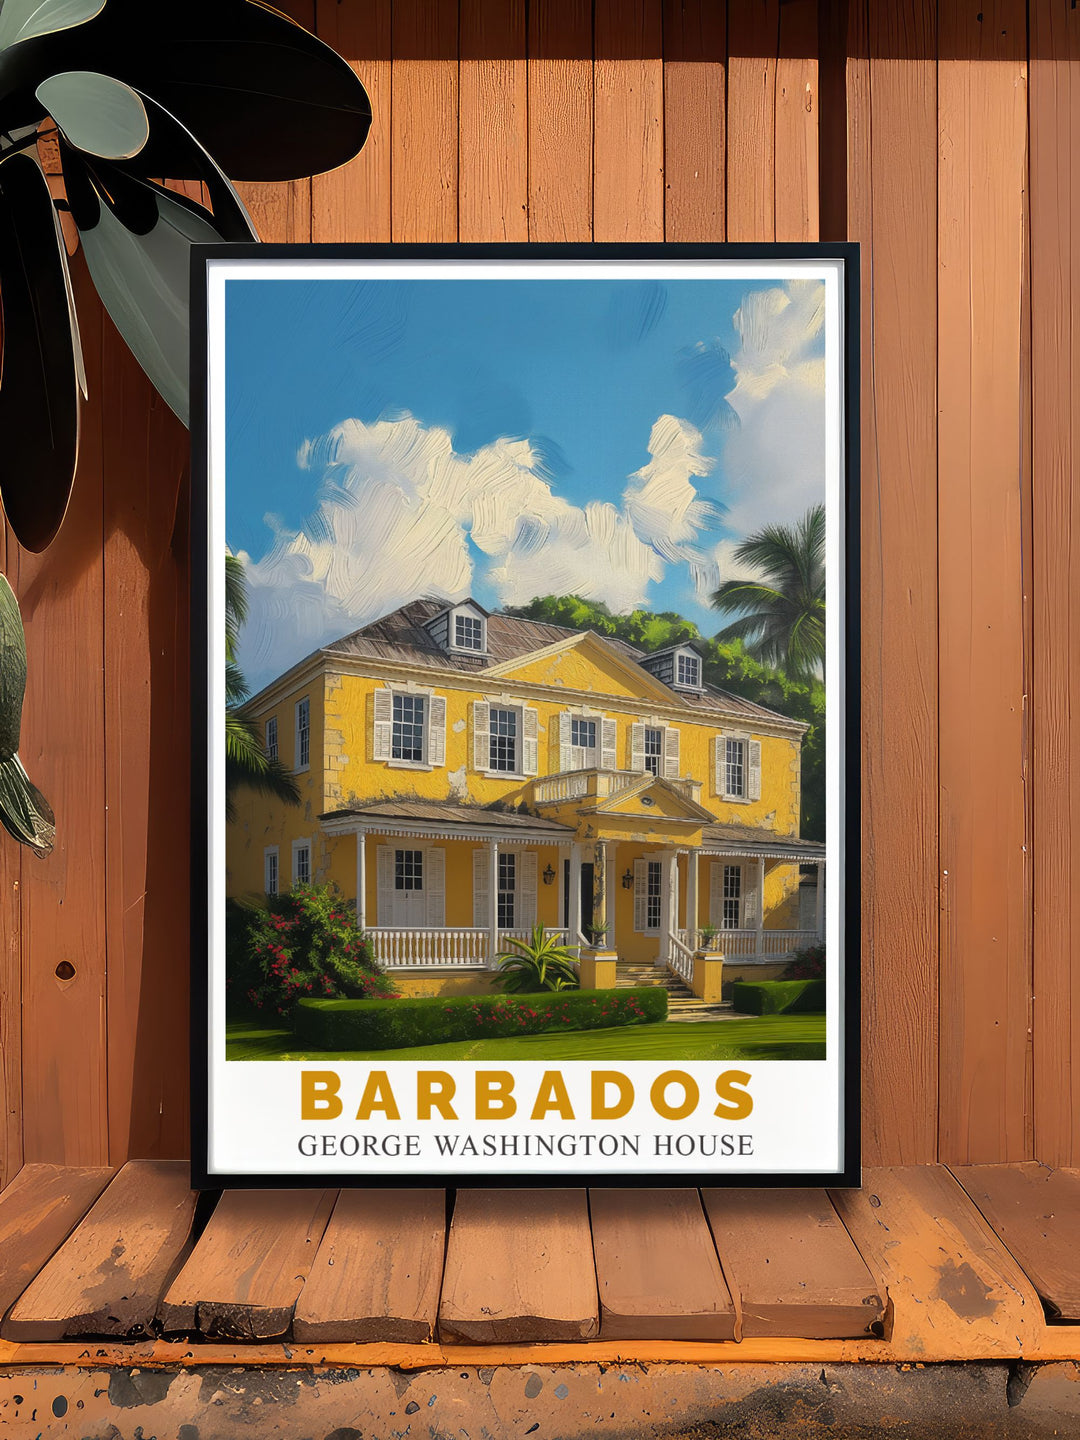 Poster of George Washington House in Barbados highlighting its architectural beauty and historical significance, capturing the essence of the islands colonial history and its connection to American heritage.